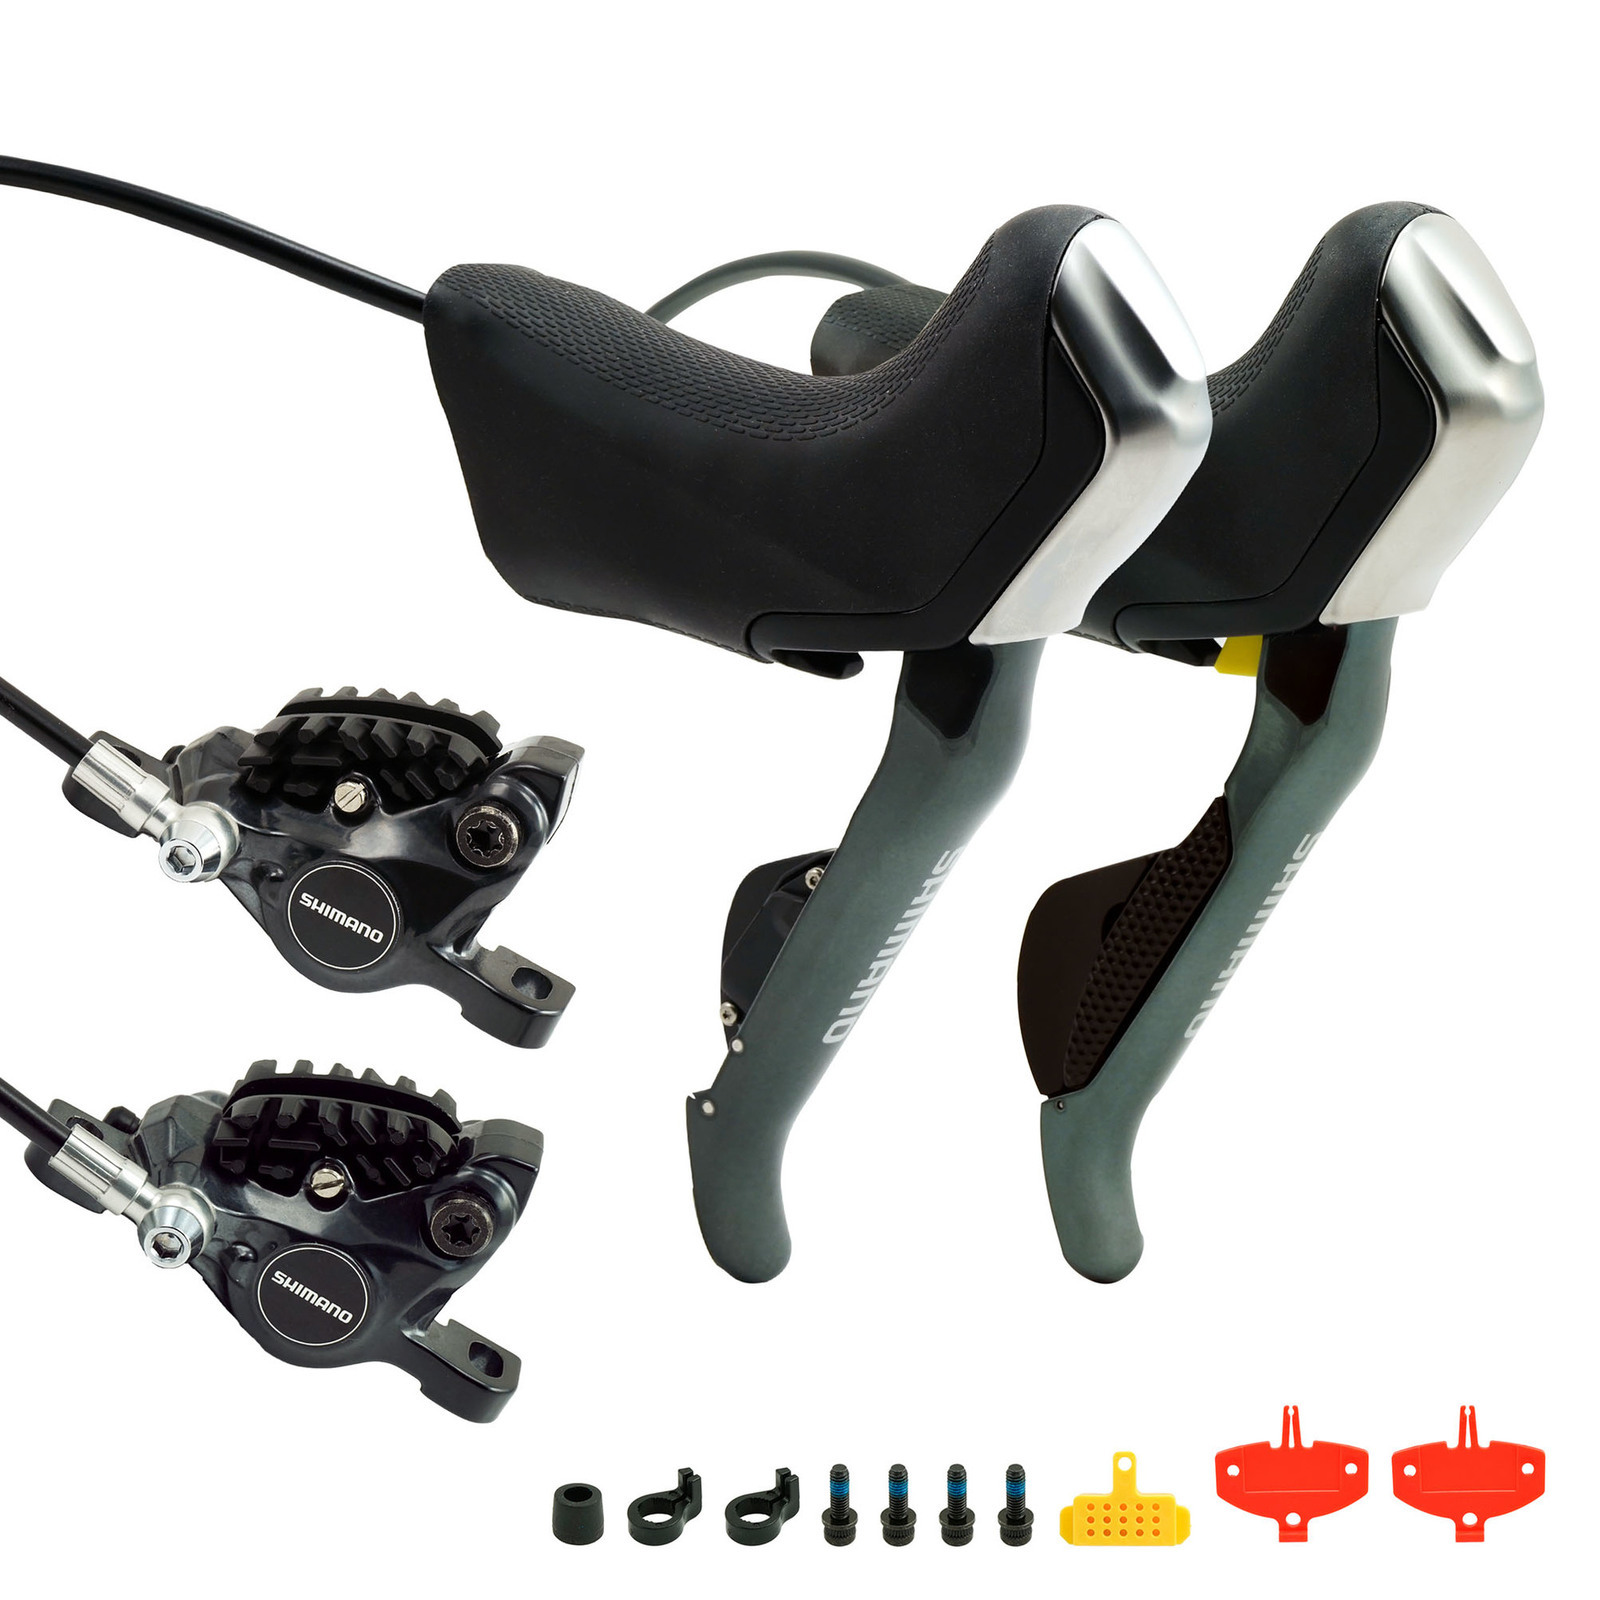 Shimano ST-R785+BR-R785 Di2 Electronic 2x11S Shifters Hydraulic Disc Brakes Set